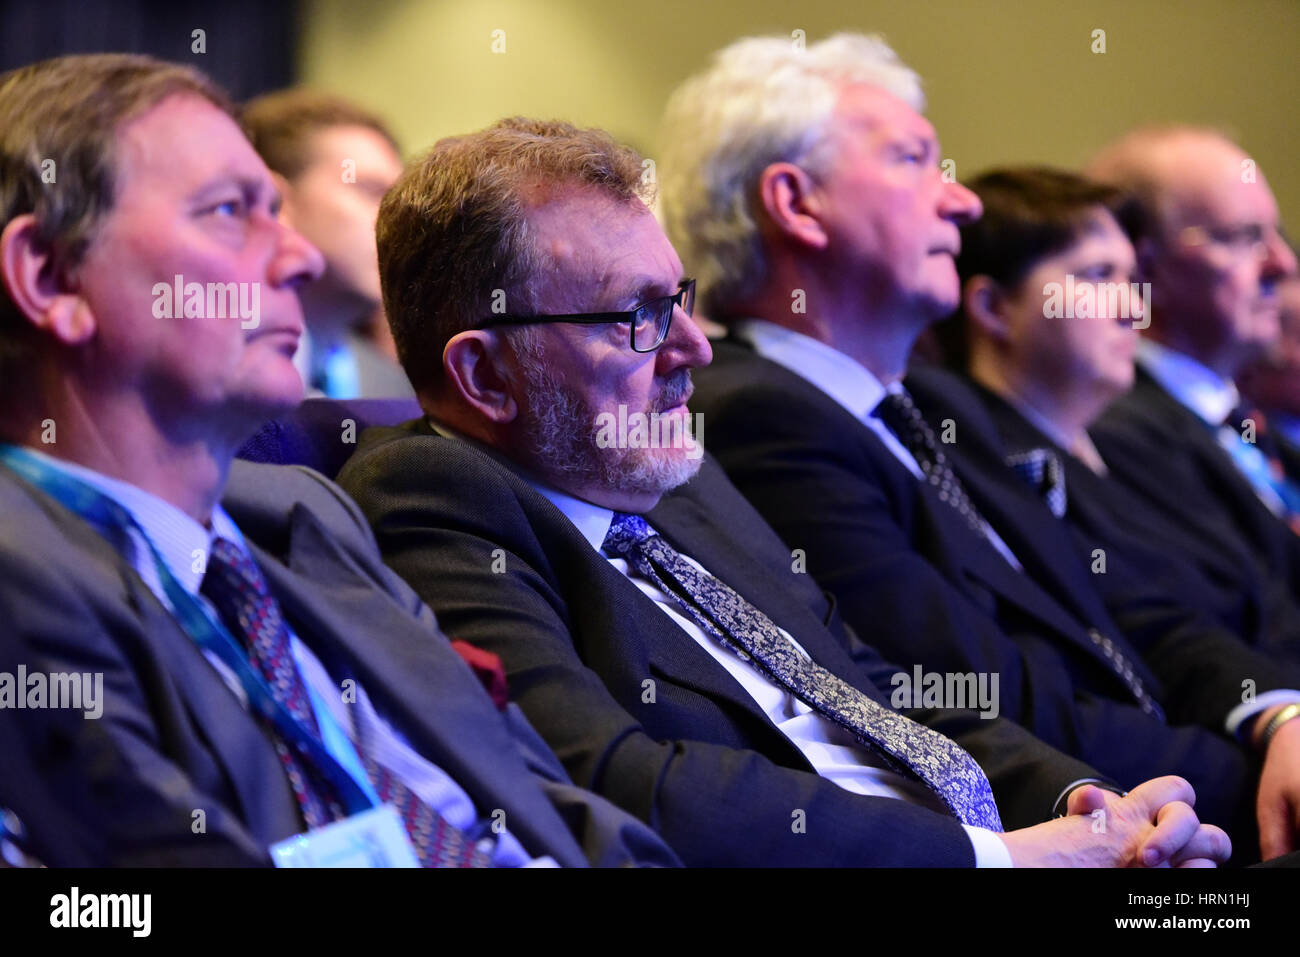 Glasgow, Scotland, UK. 3rd March 2017. David Mundell (2nd L), Secretary of State for Scotland in the UK Government, listens to Theresa May's speech at the Scottish COnservative Party spring conference, Credit: Ken Jack/Alamy Live News Stock Photo